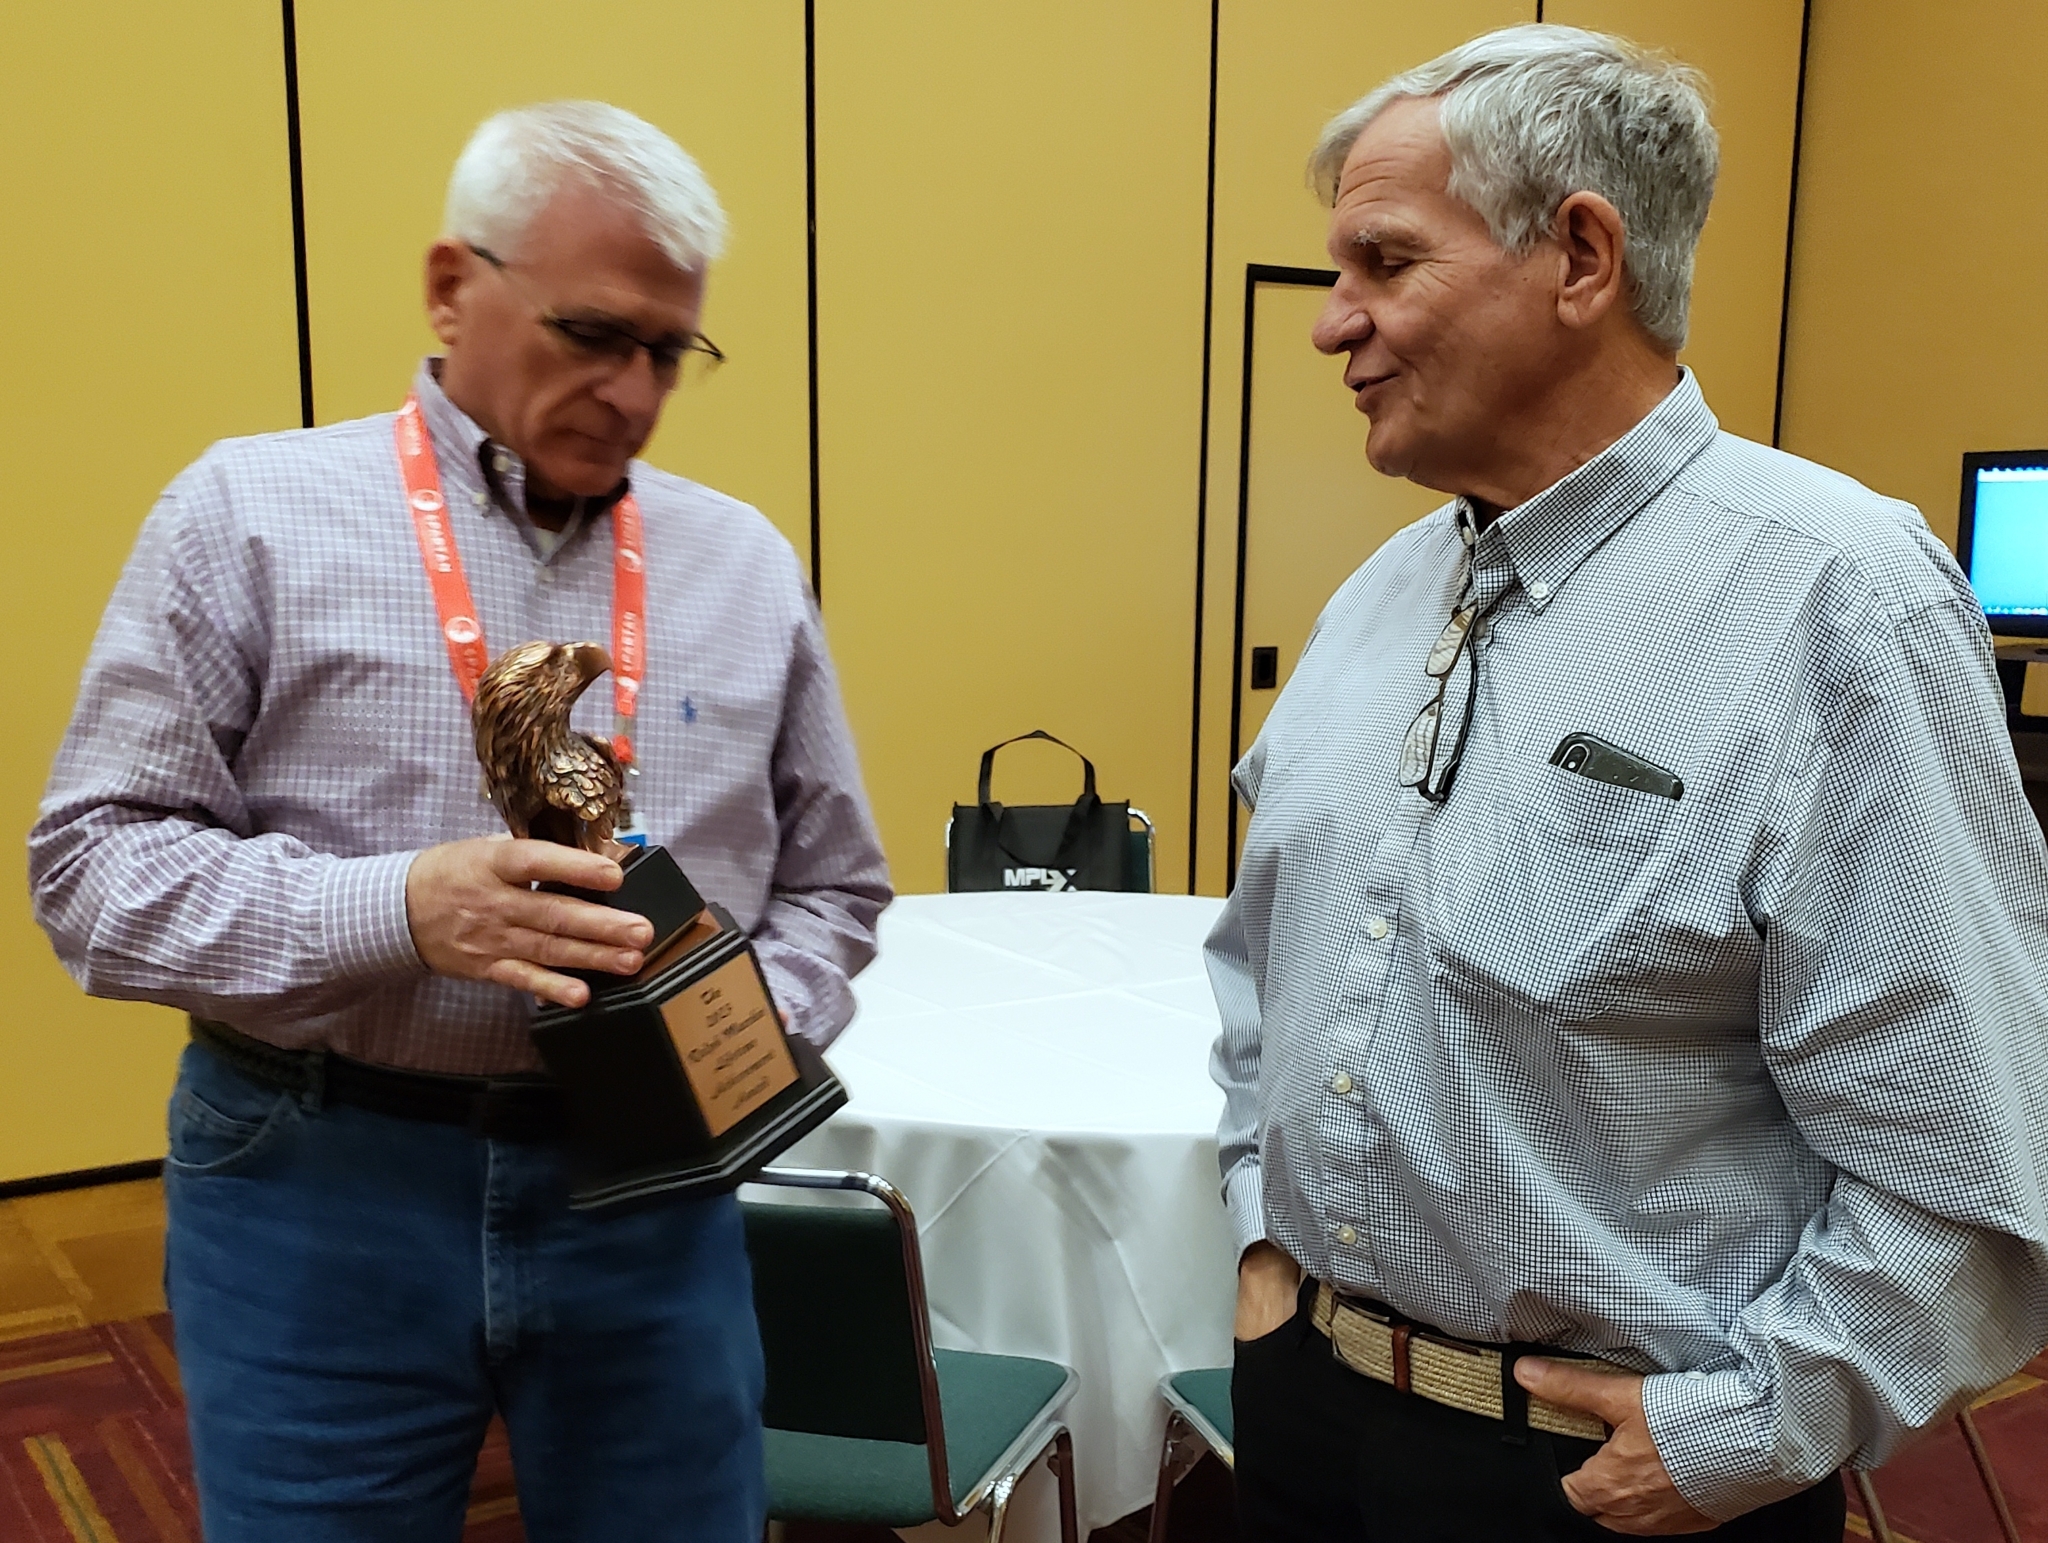 Bob Kendall, owner of COLE Publishing (right) talks with Jeff Rachlin, recipient of the Ralph Macchio Lifetime Achievement Award following the award presentation on Wednesday at the 2023 Water & Wastewater Equipment, Treatment & Transport Show.